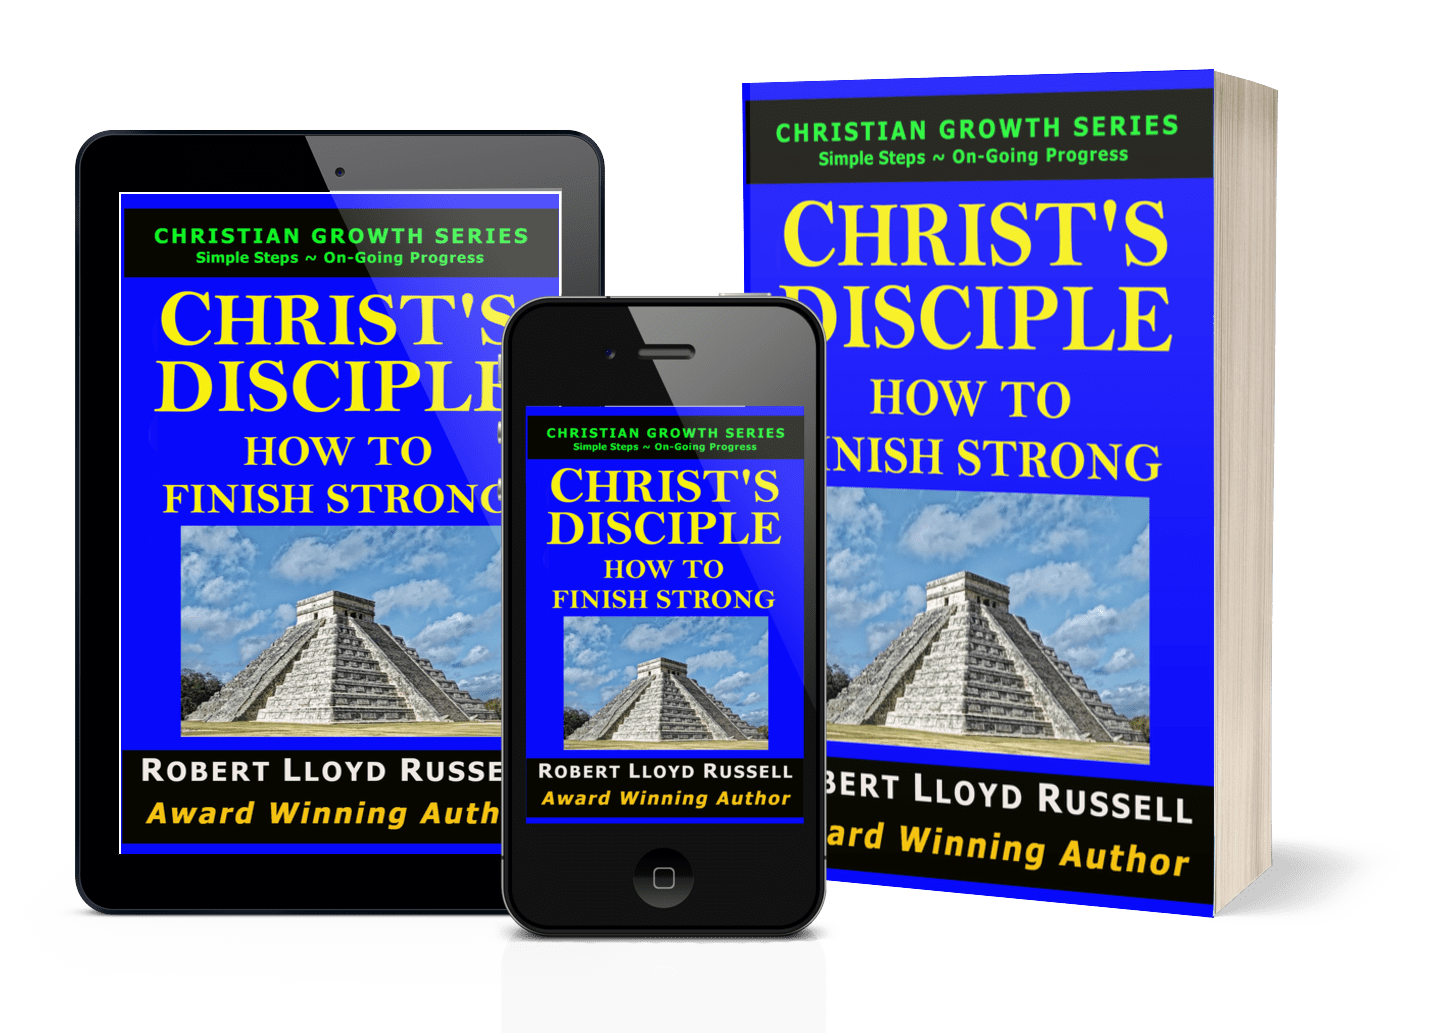 Book cover - CHRIST’S DISCIPLE, How To Finish Strong.